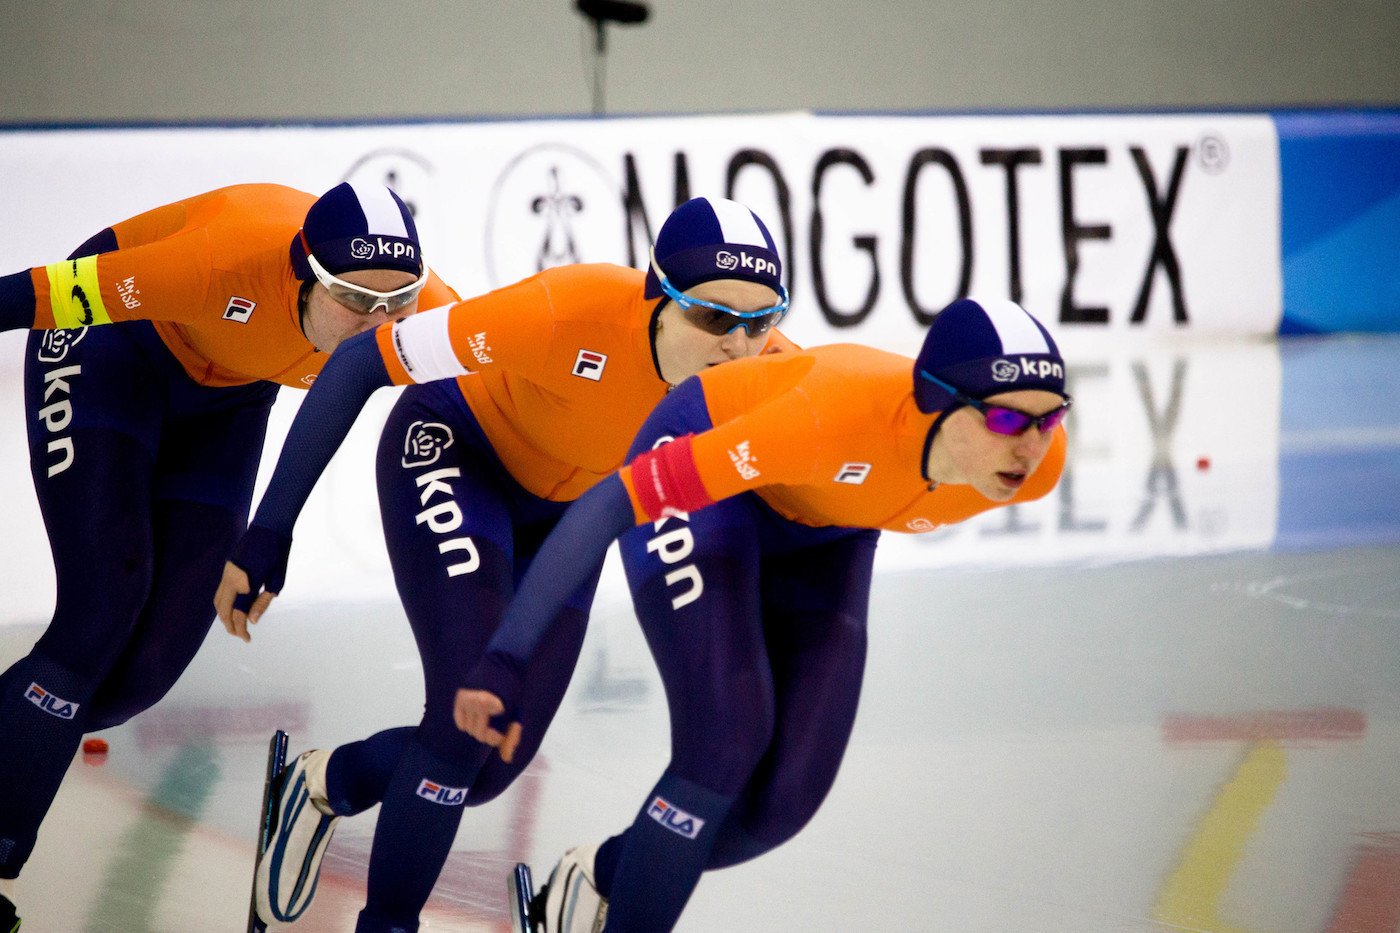 The Netherlands have a long and proud history in speed skating ©FISU